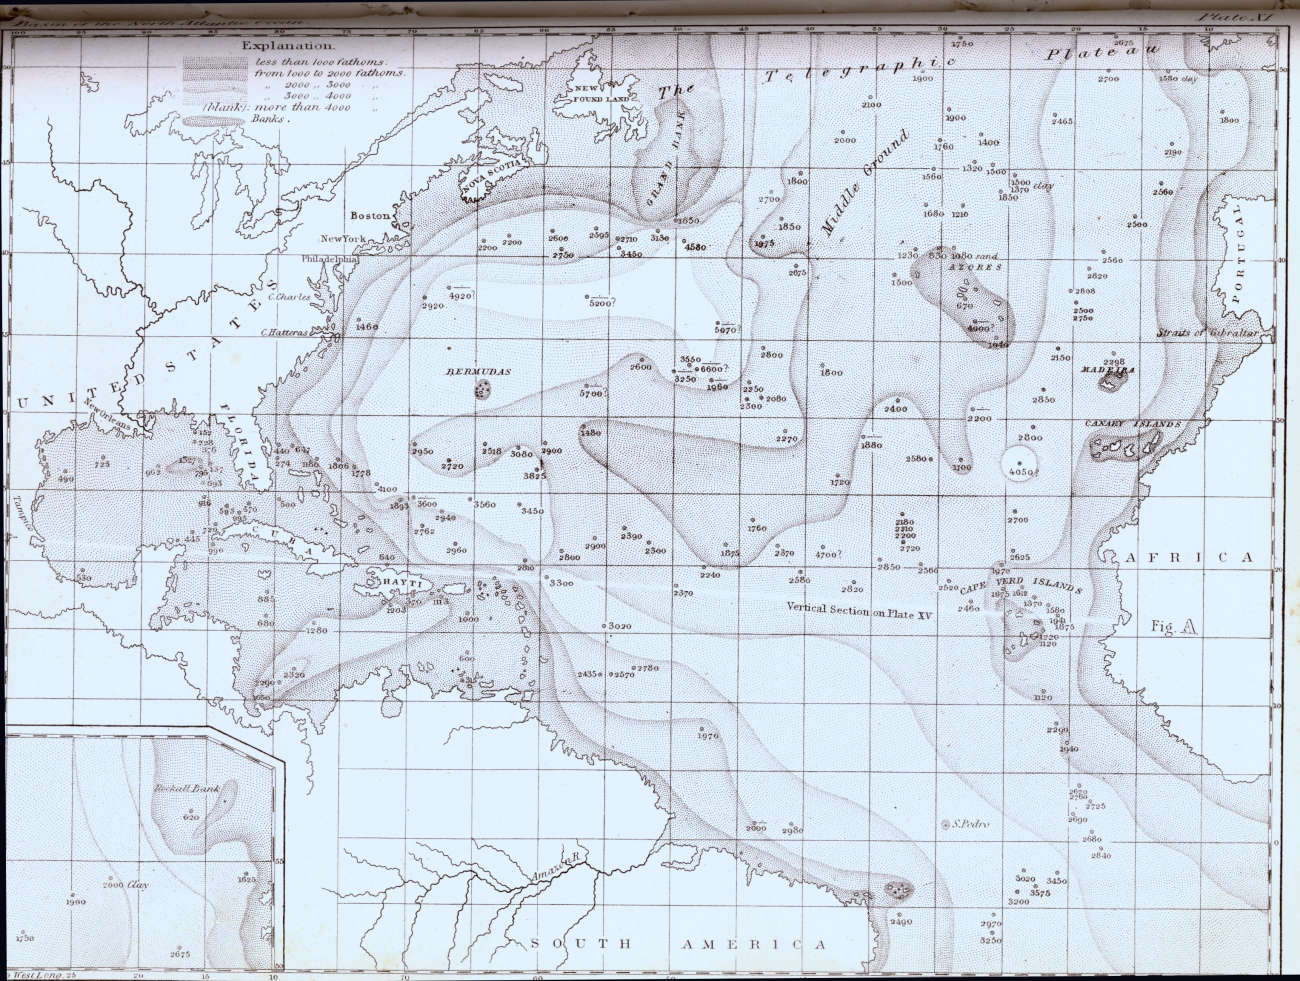 In 1858, Matthew Fontaine Maury modified his 1854 map to show theTelegraphic Plateau extending east-west across the Atlantic Ocean and an area ofrelatively shoal ground which he called Middle Ground